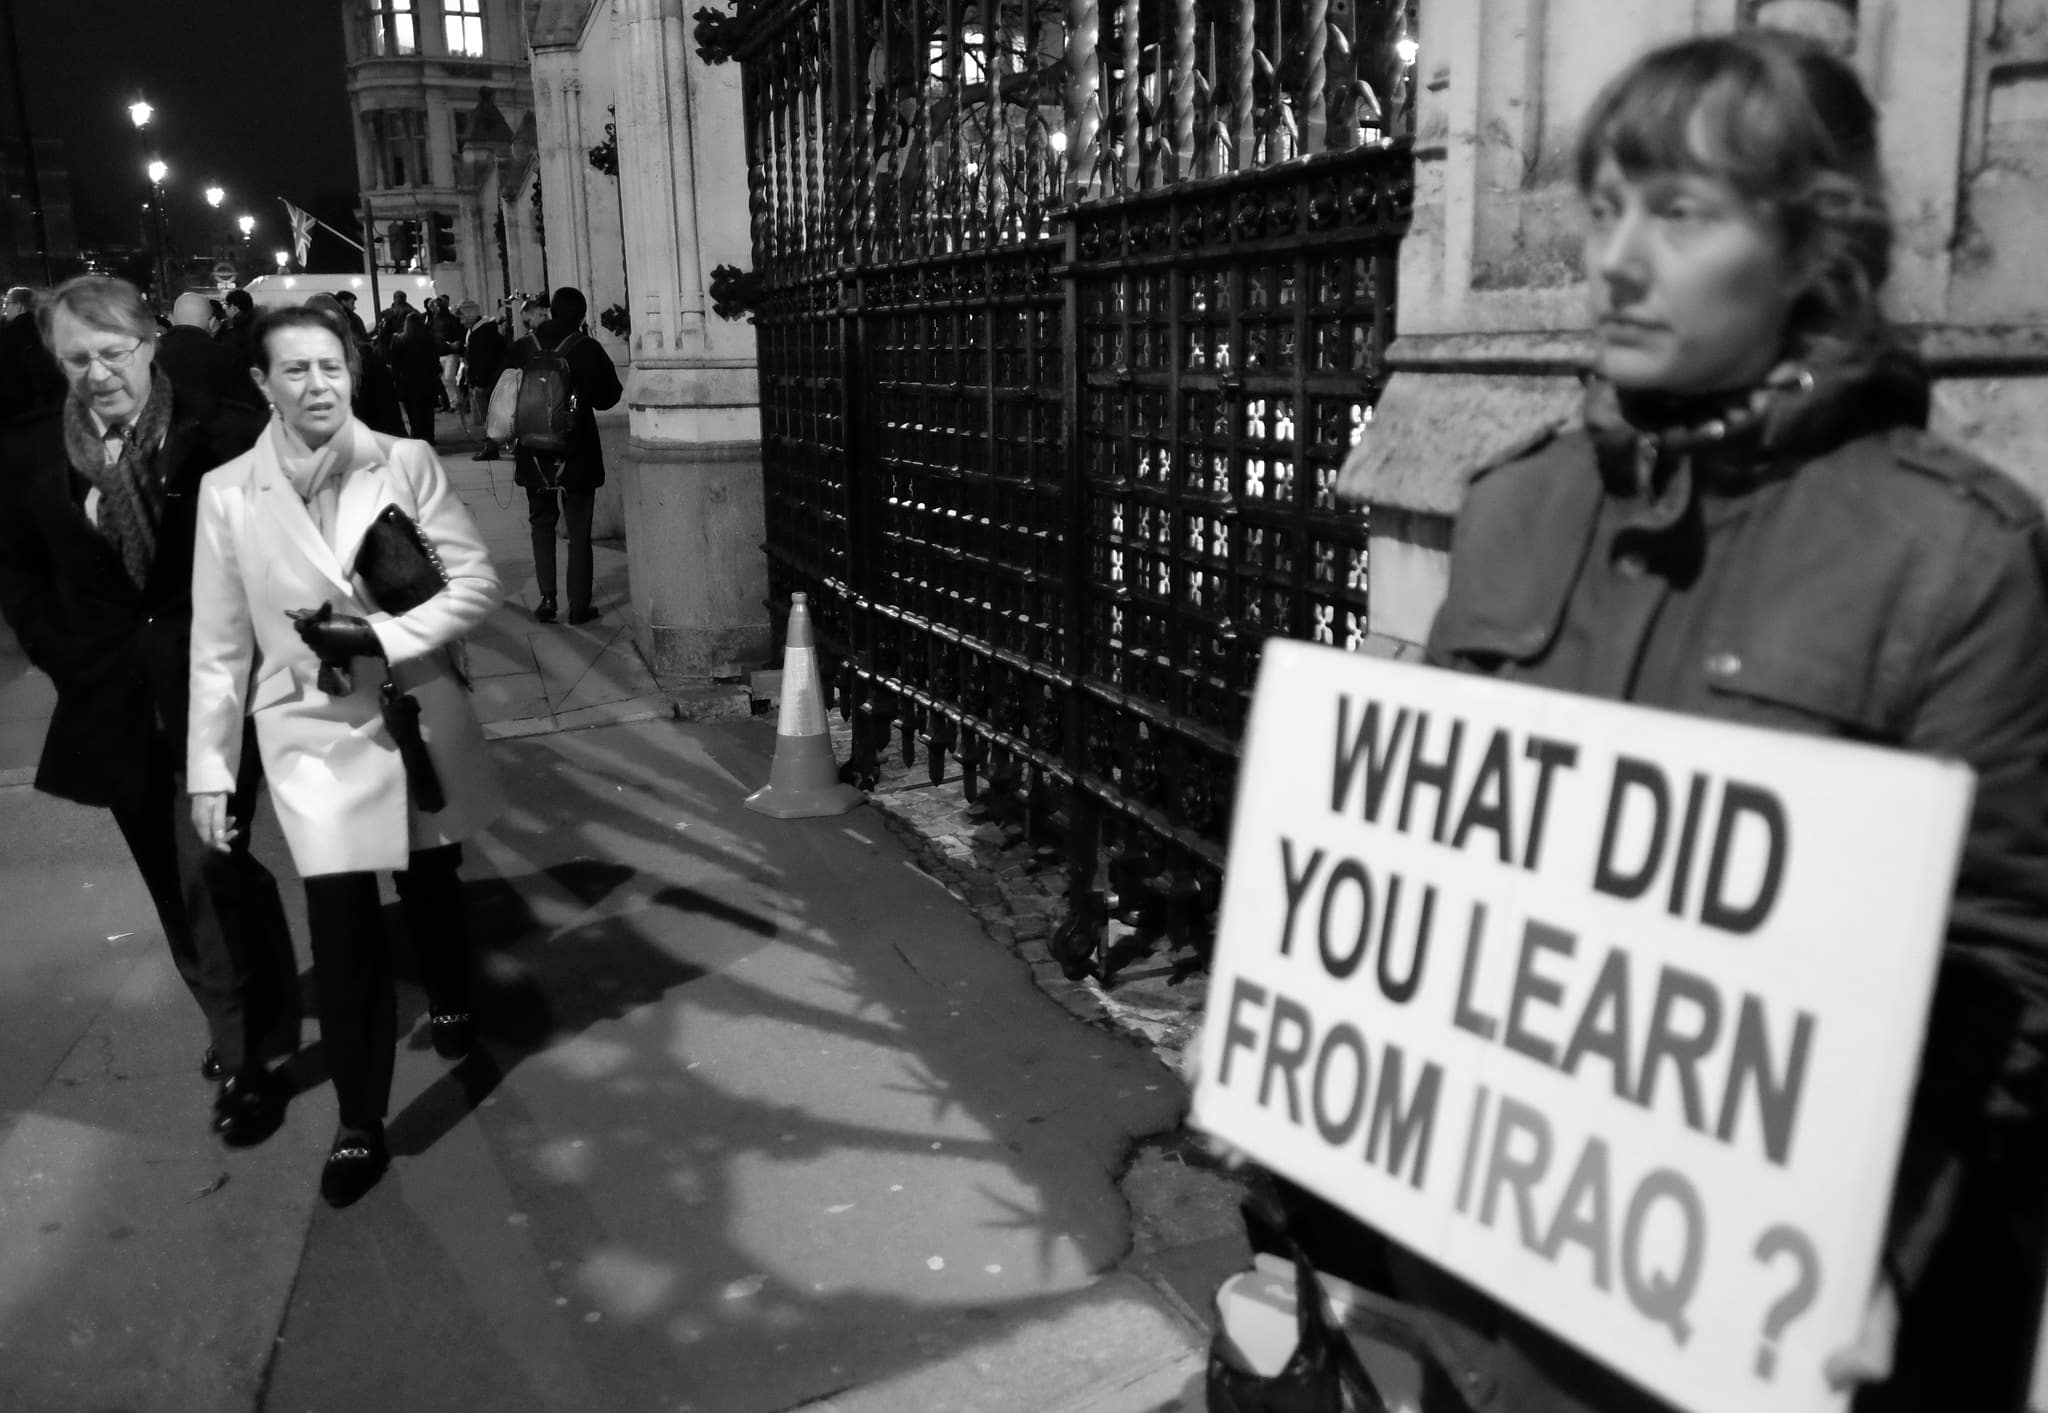 What Did You Learn from Iraq?